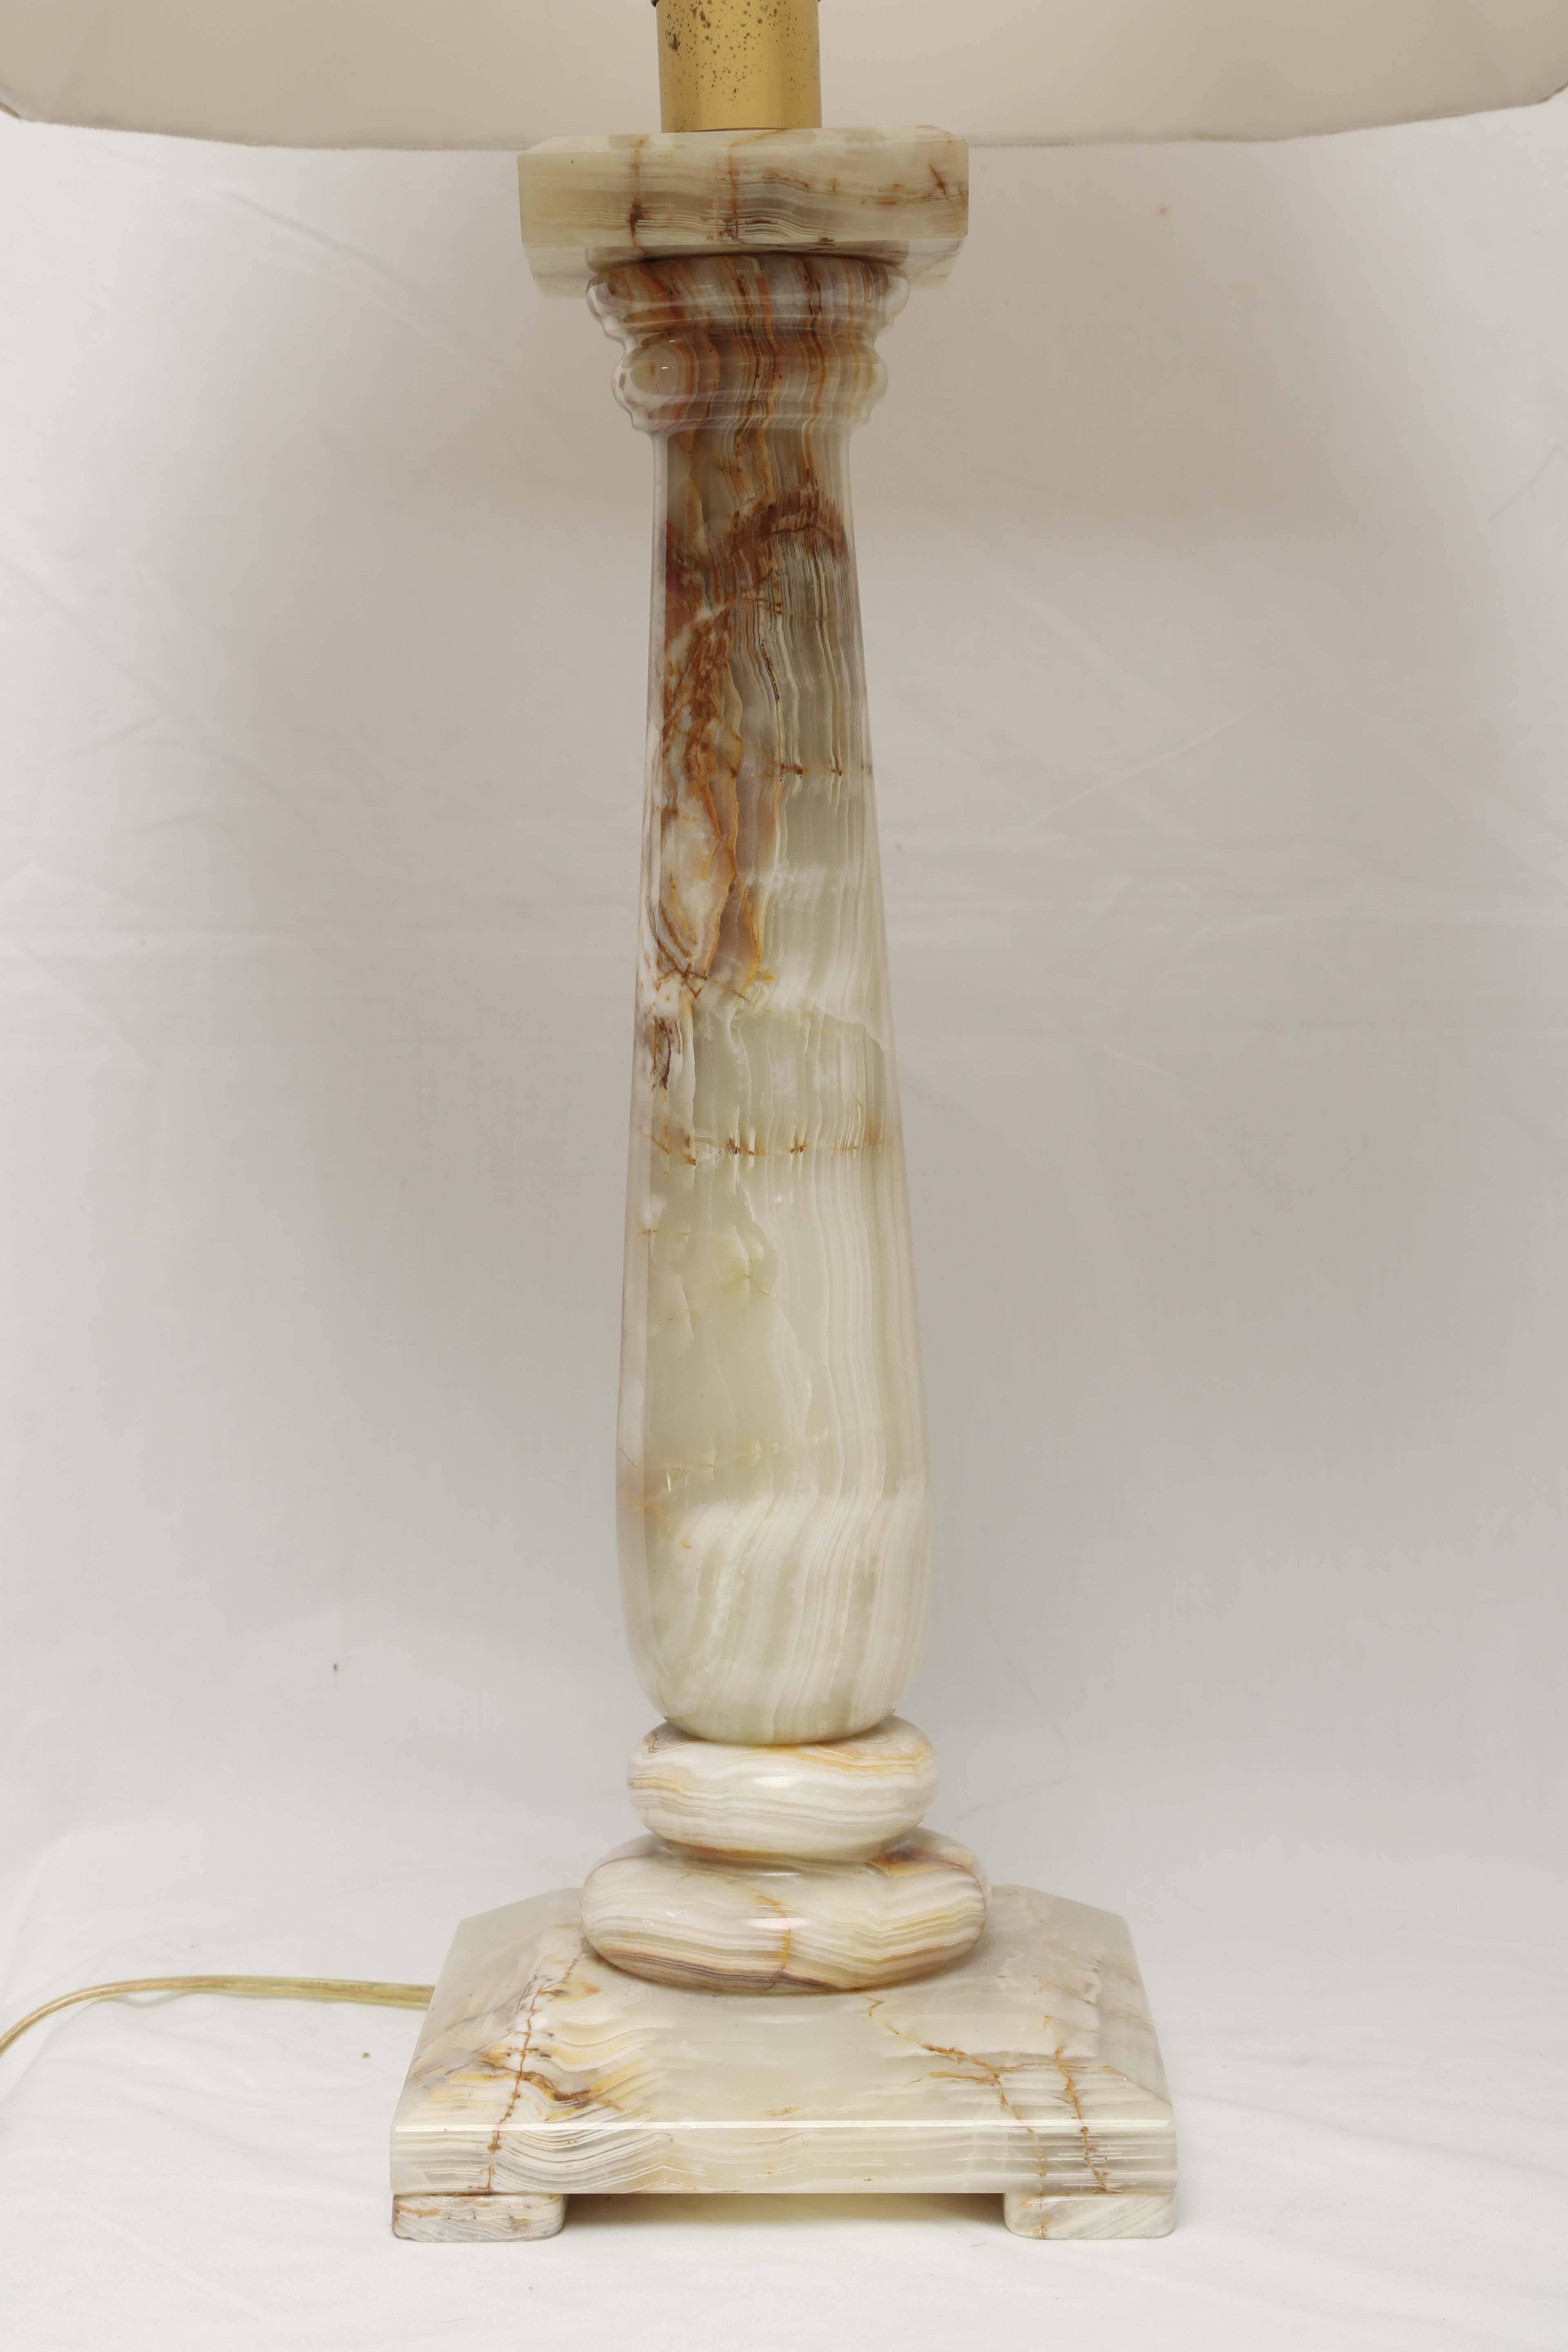 These lamps have a timeless style to them, probably Italian in origin they could either work in a mid century modern aesthetic or a very regal Hollywood regency set up. Made of beautiful onyx stone with lots of veining and color. Done in a